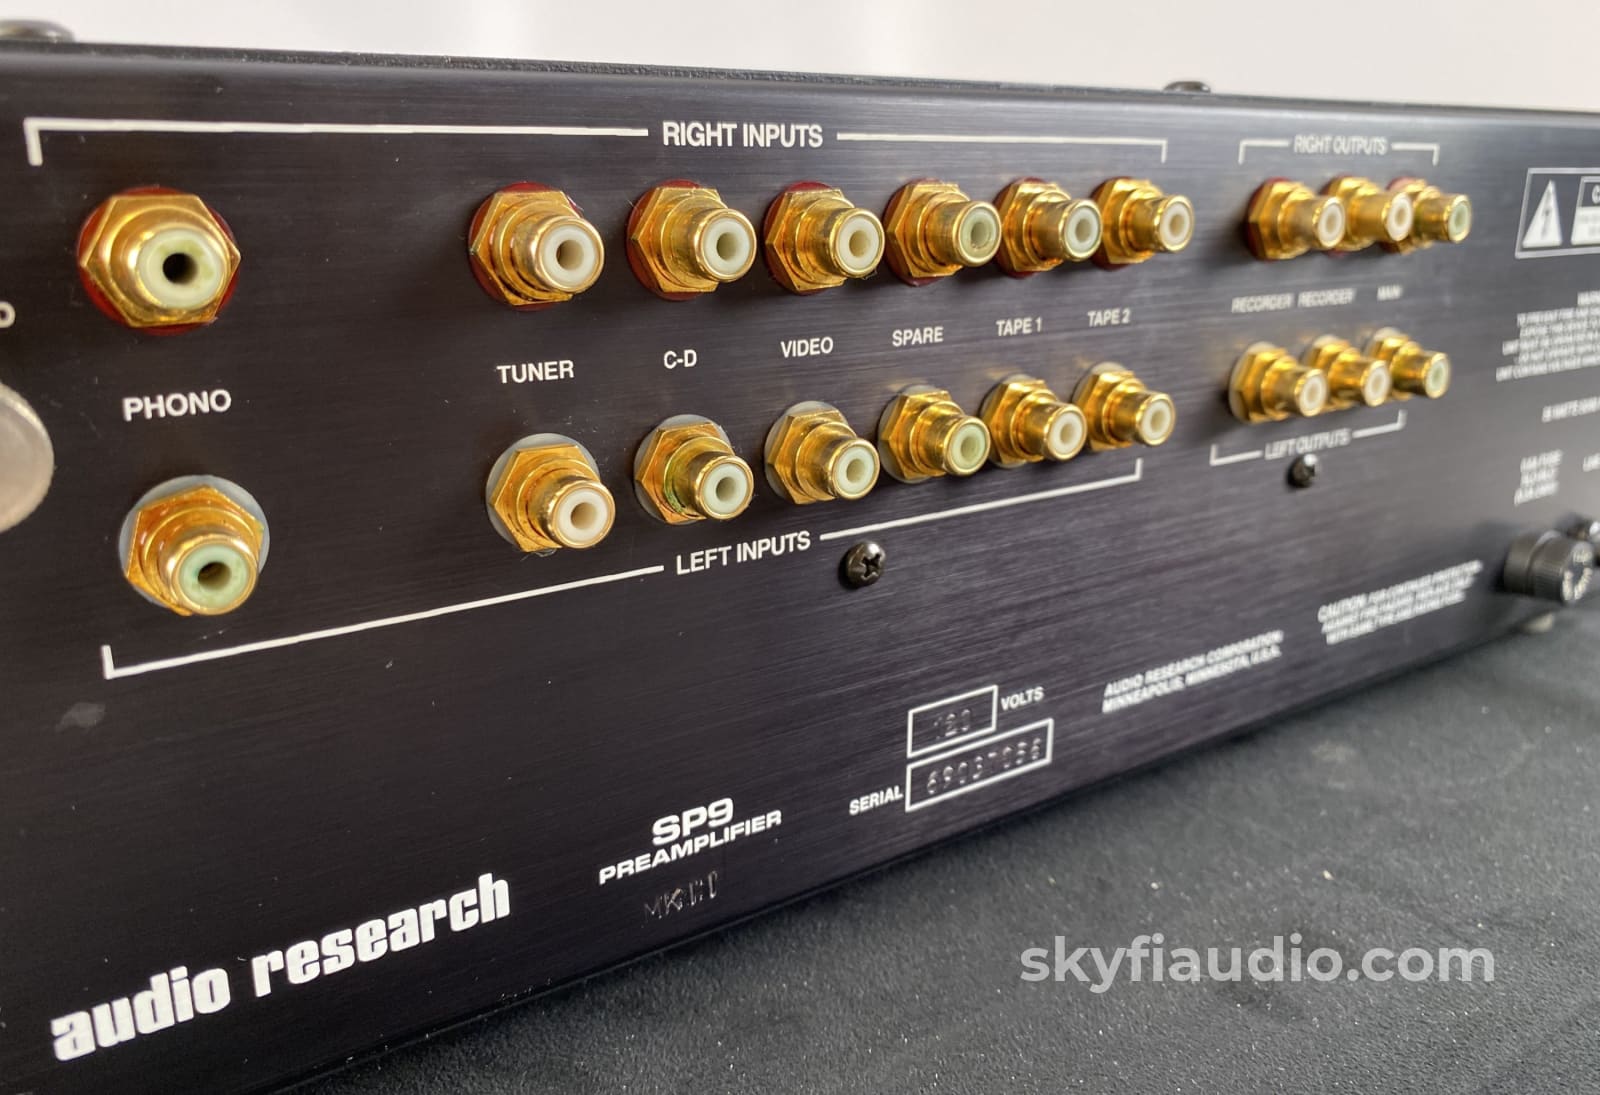 Audio Research Sp9 Mkii Tube / Solid State Hybrid Preamp With Phono Input Preamplifier